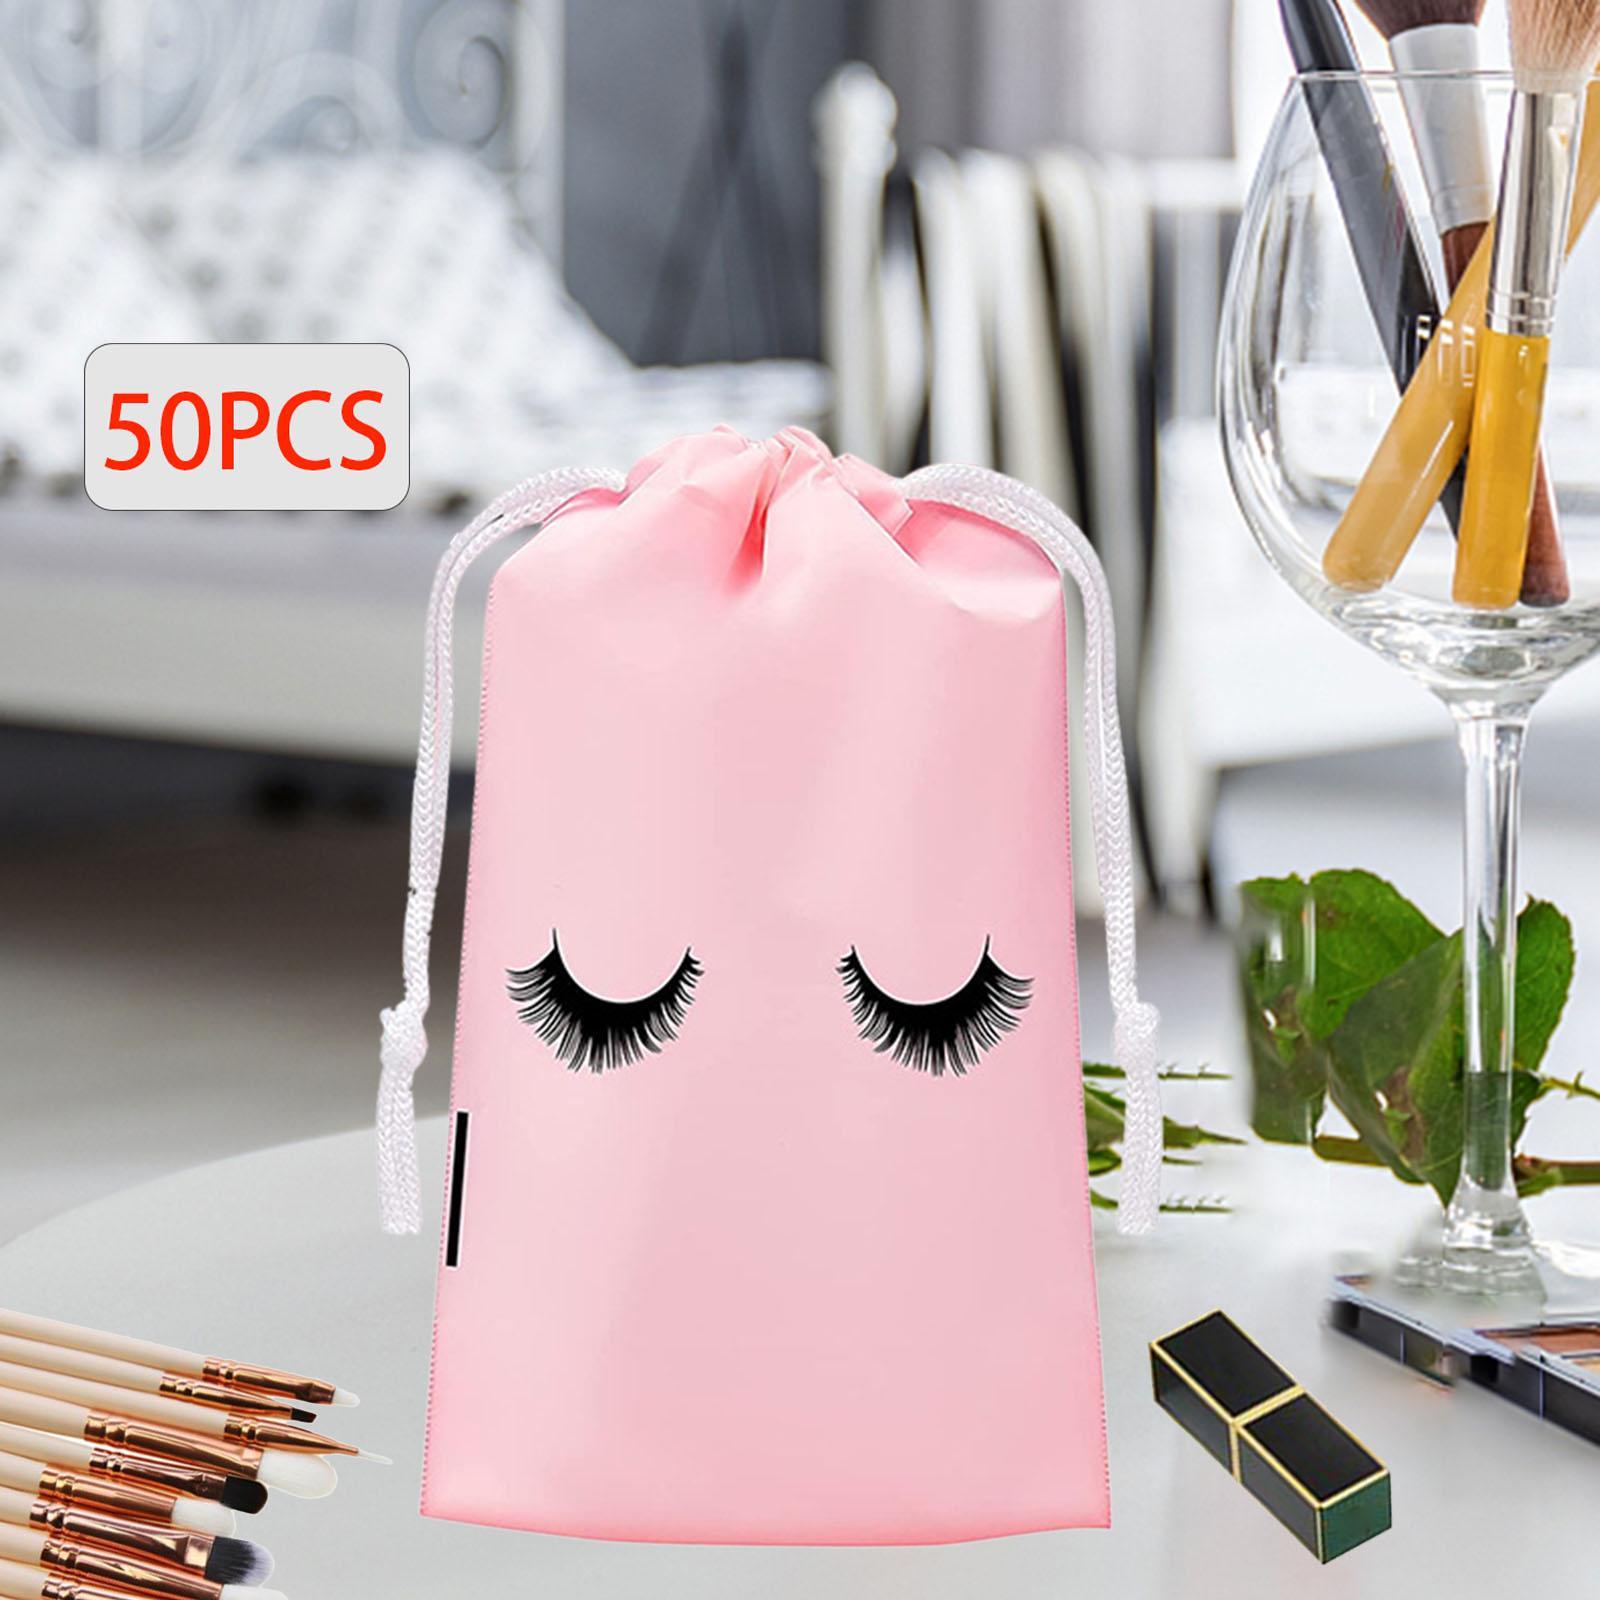 50x Travel Toiletry Makeup Pouch Waterproof with Drawstring Toiletry Bag